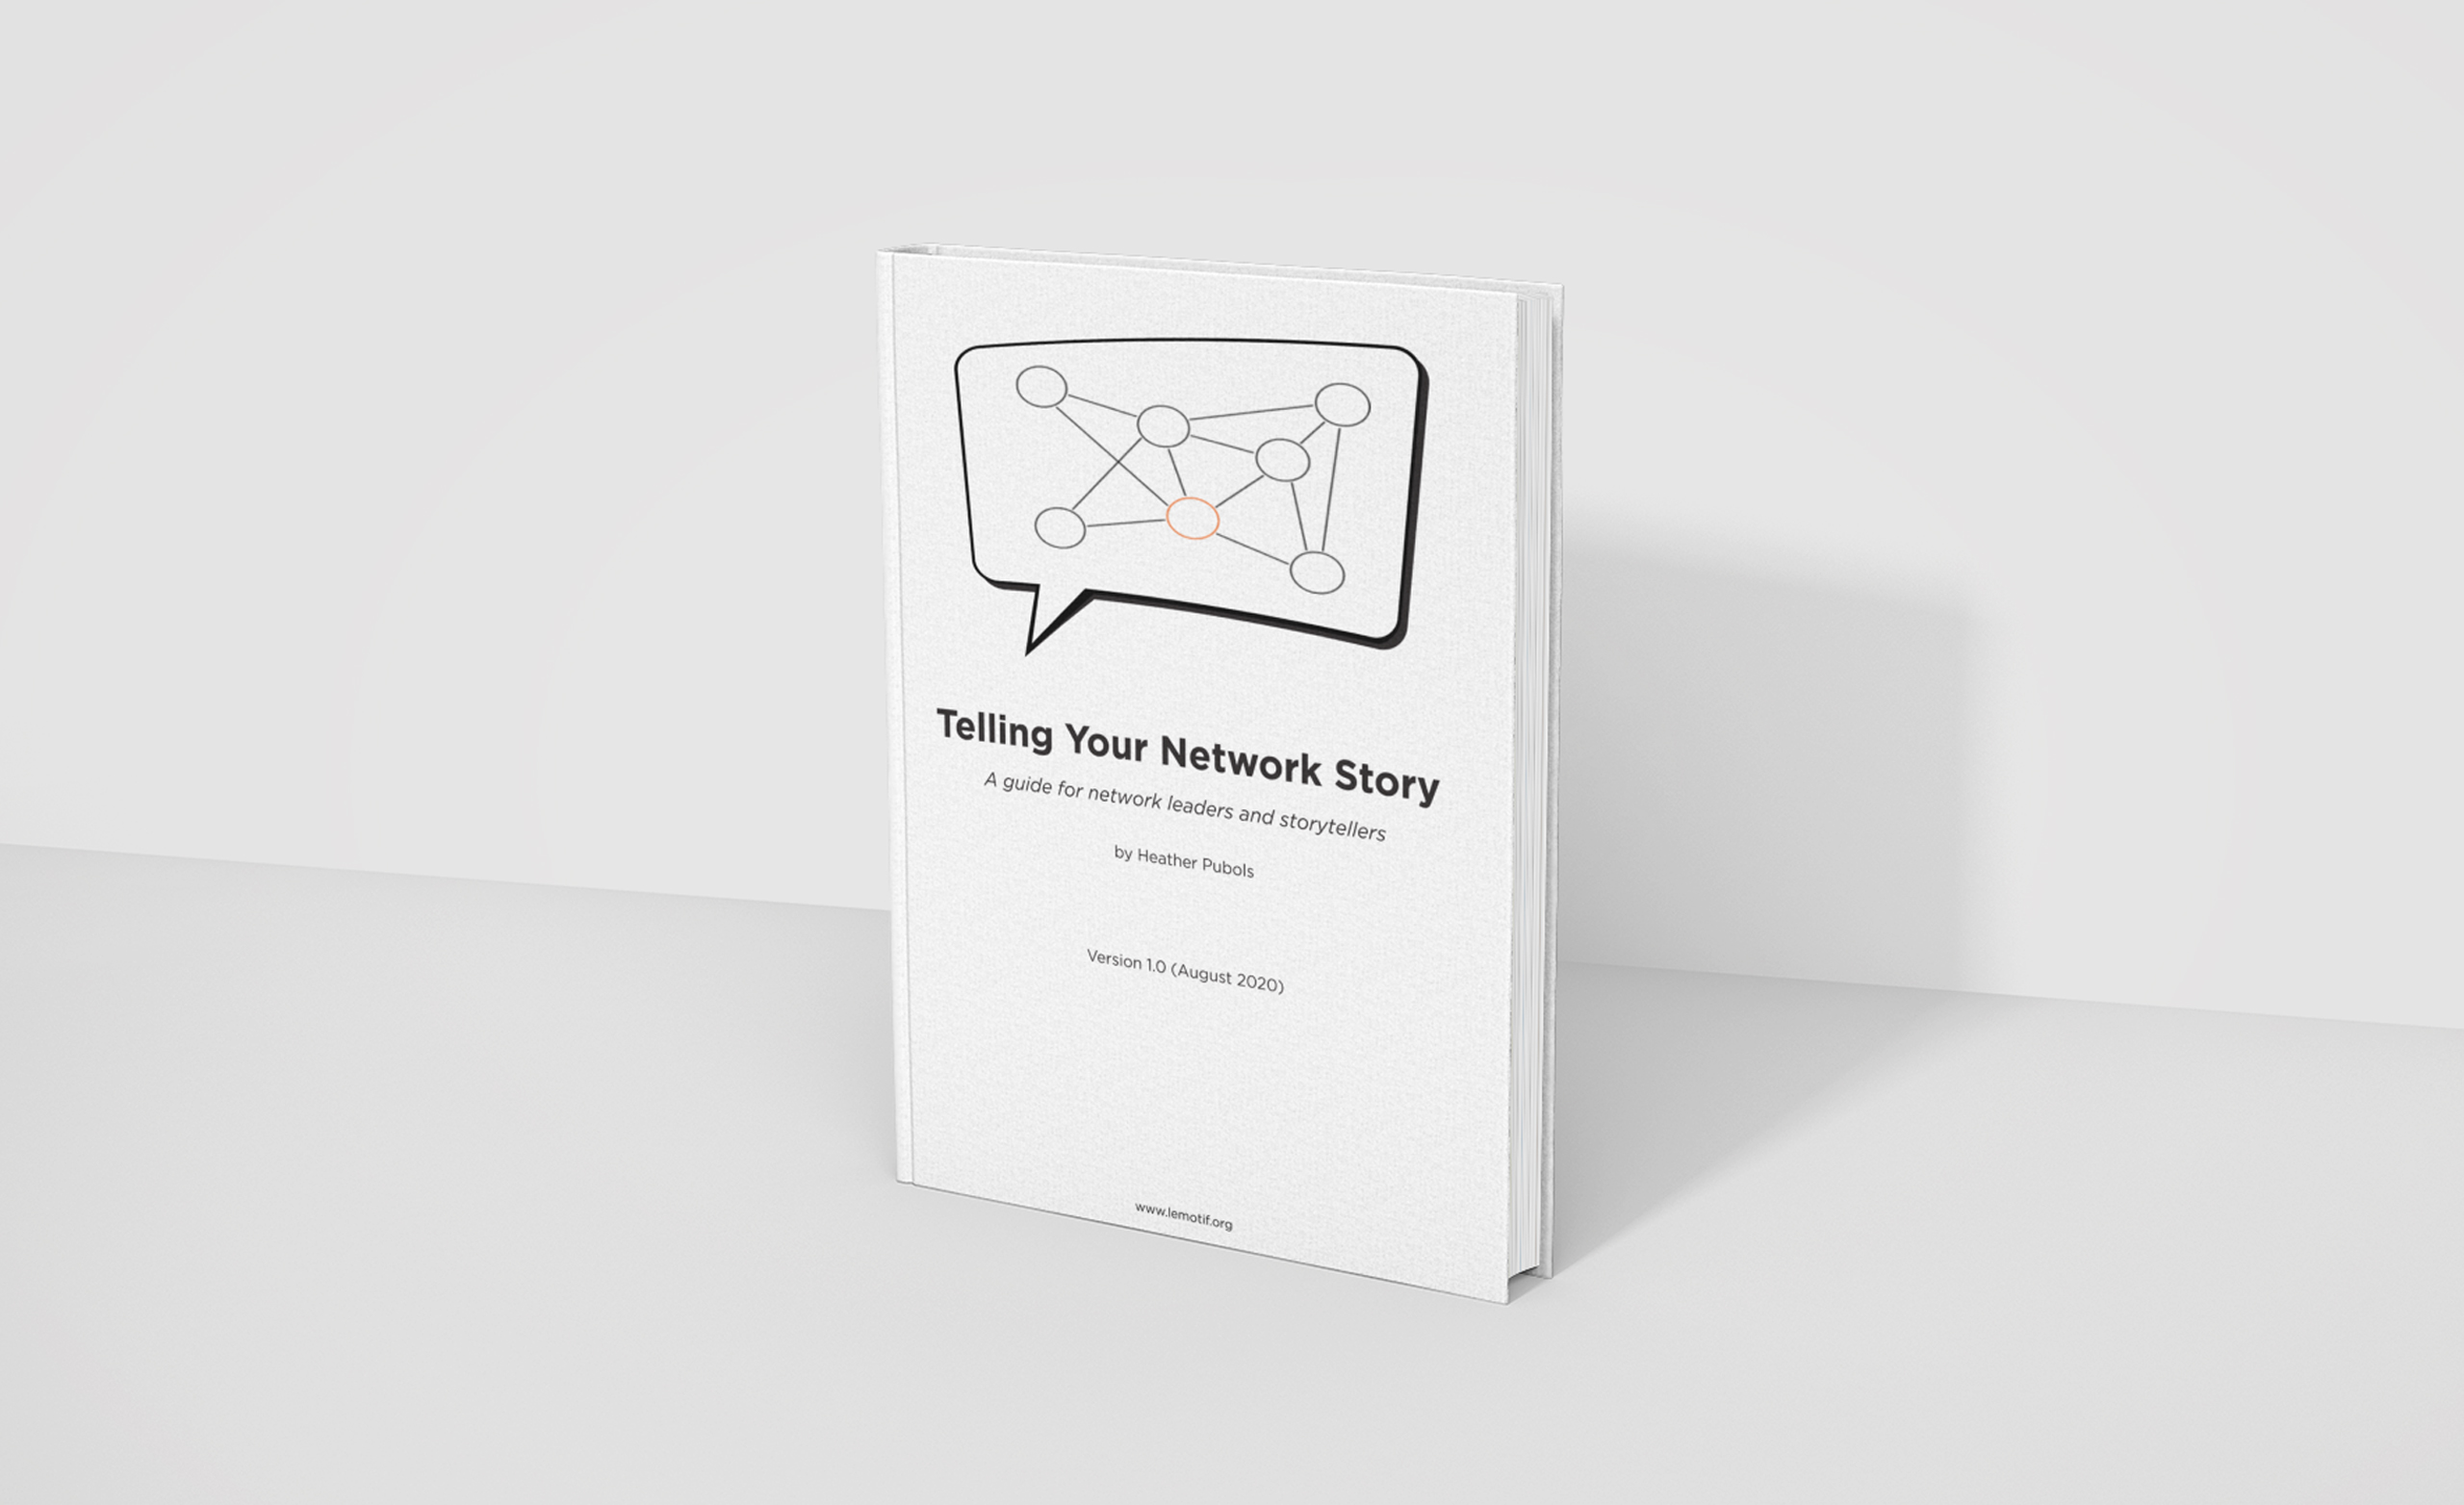 Telling Your Network Story E-Book